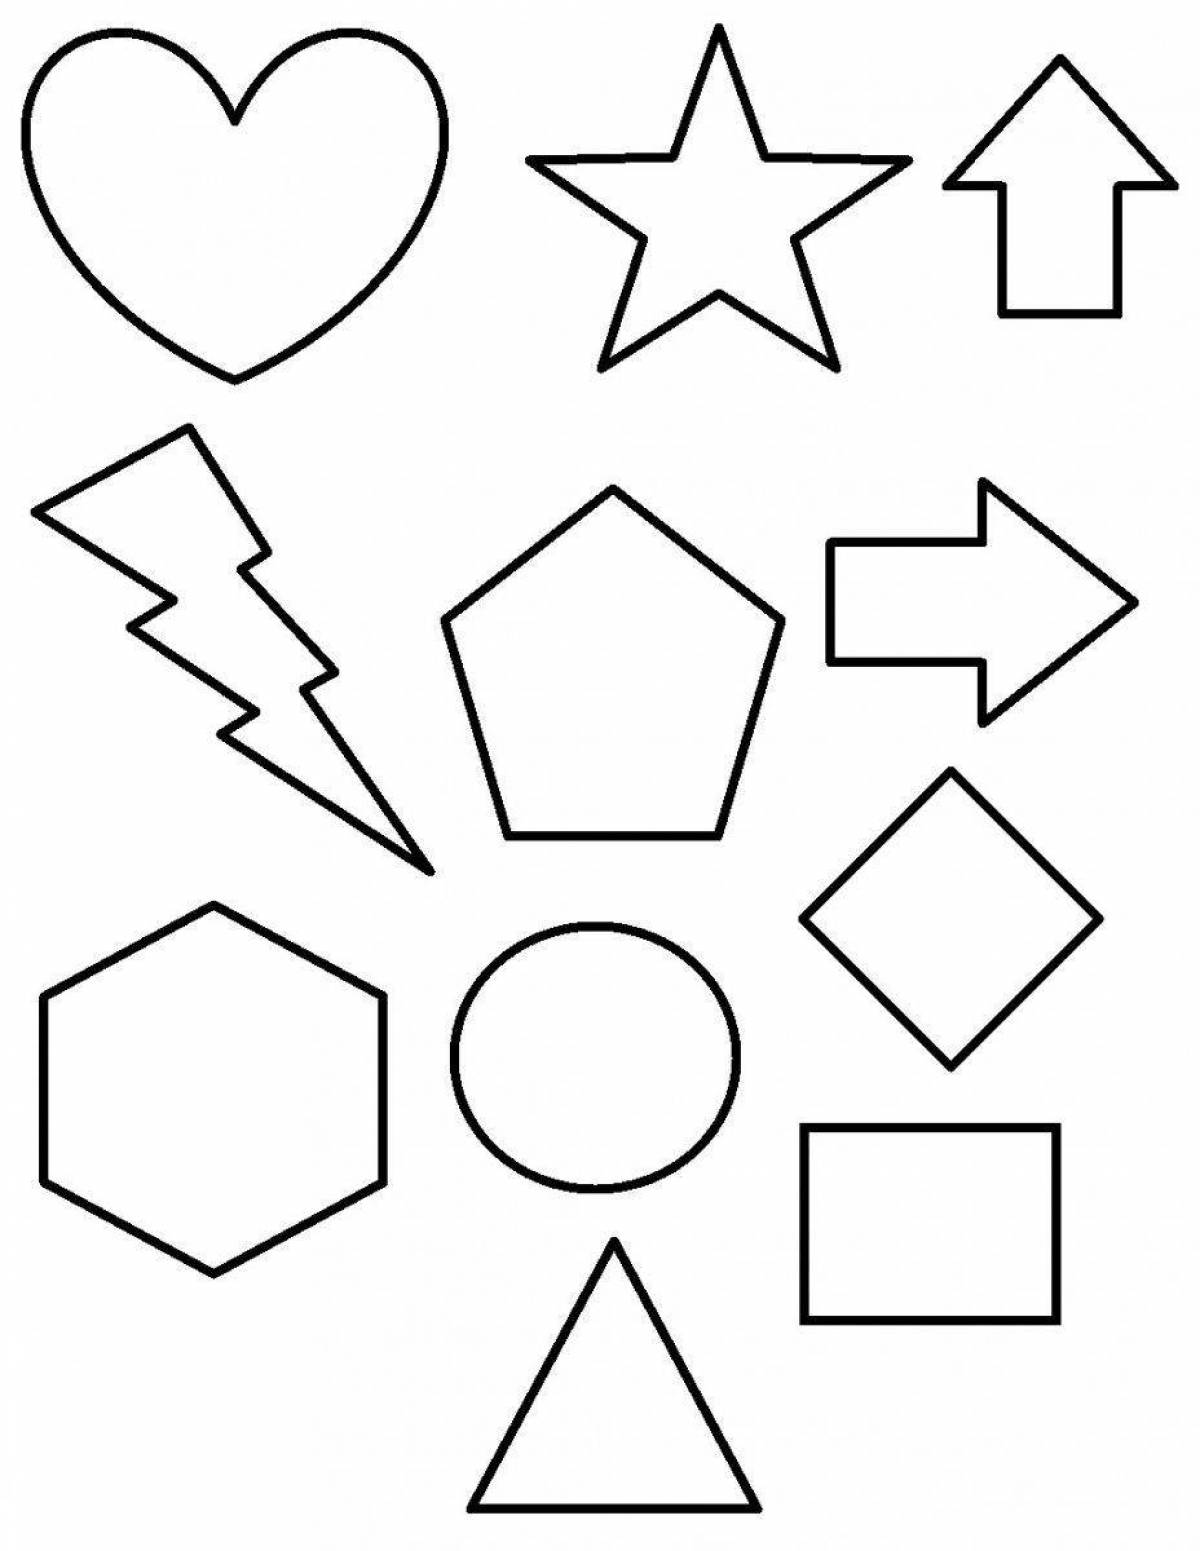 Creative geometric shapes coloring pages for kids